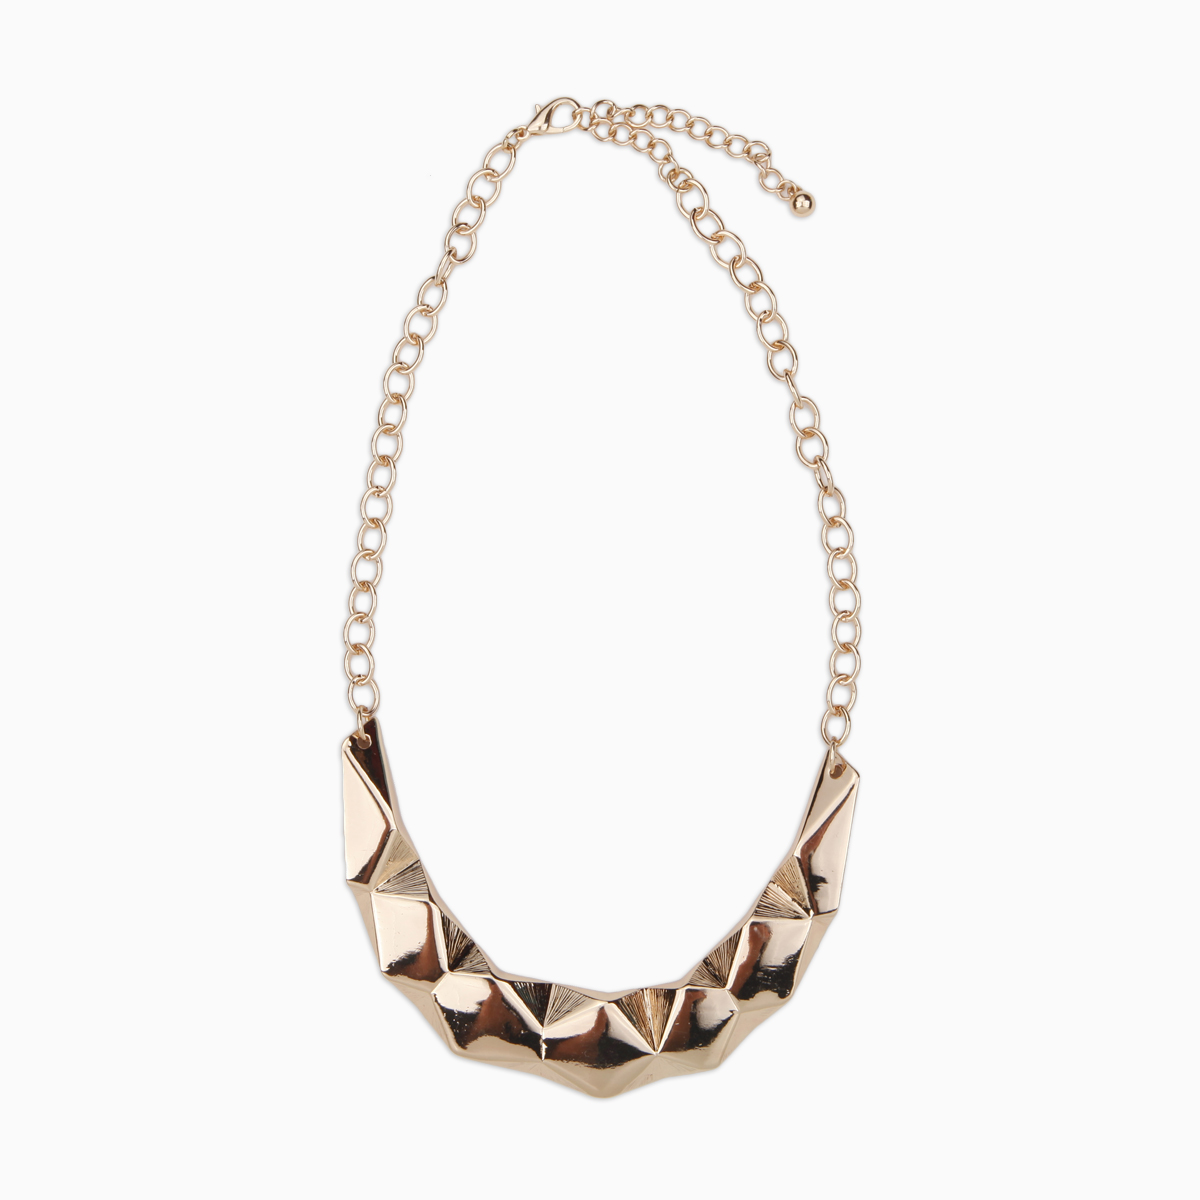 Fragmented Collar Necklace in Gold | DAILYLOOK